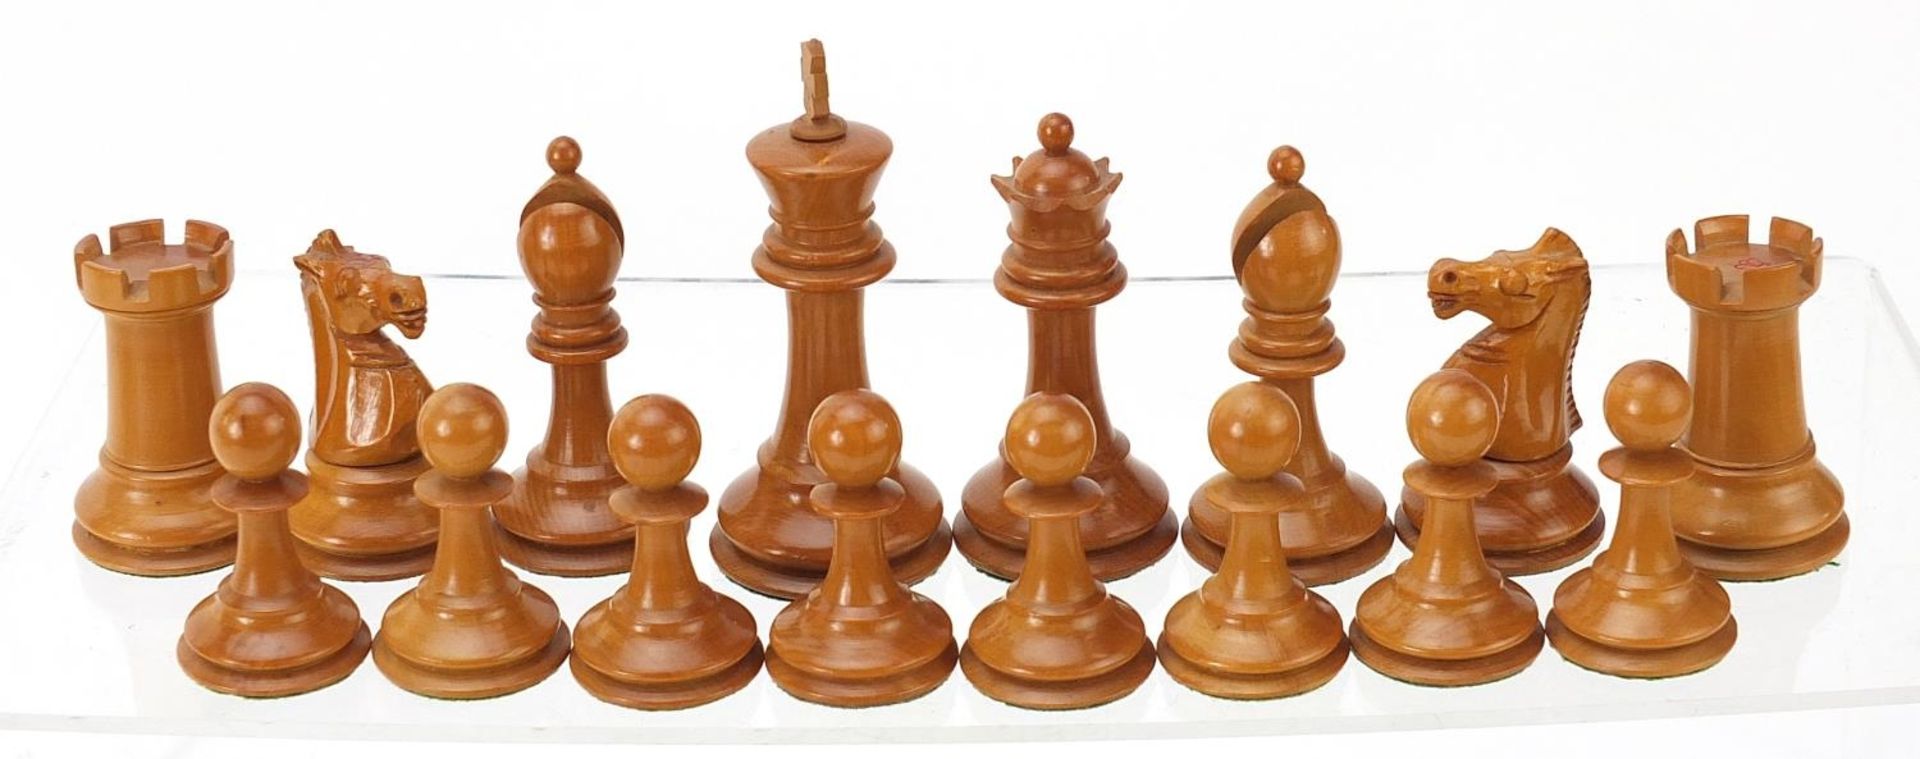 Ebony and boxwood Staunton pattern chess set with folding board, the largest pieces each 8cm high - Image 3 of 7